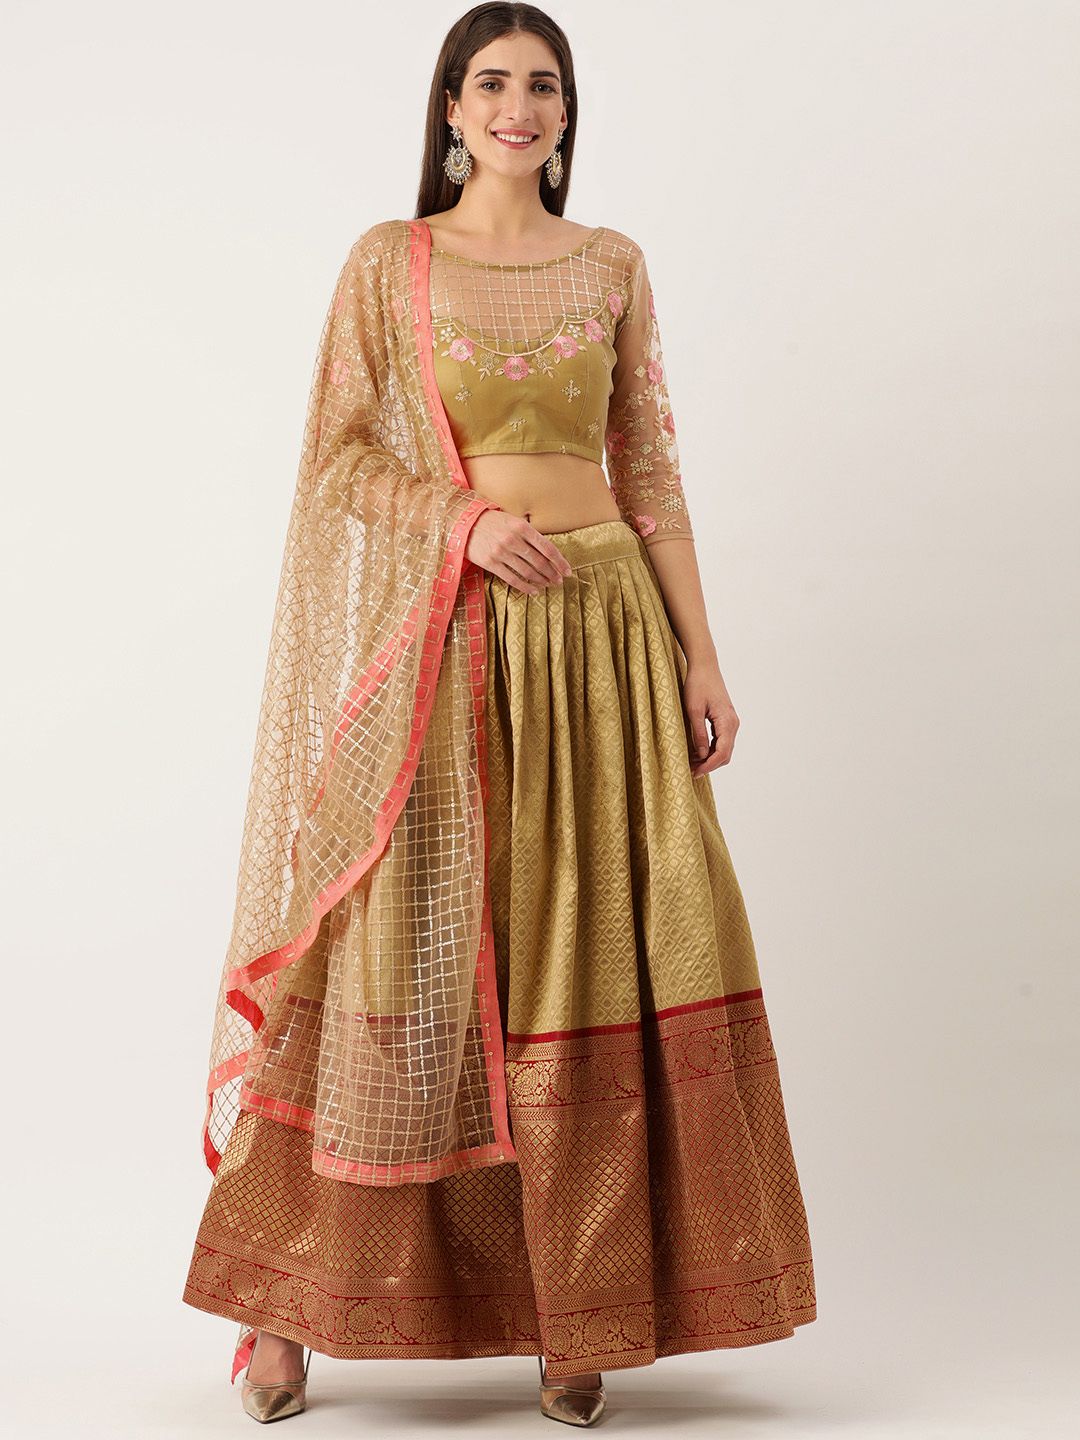 LOOKNBOOK ART Gold-Toned Embroidered Semi-Stitched Lehenga & Unstitched Blouse With Dupatta Price in India